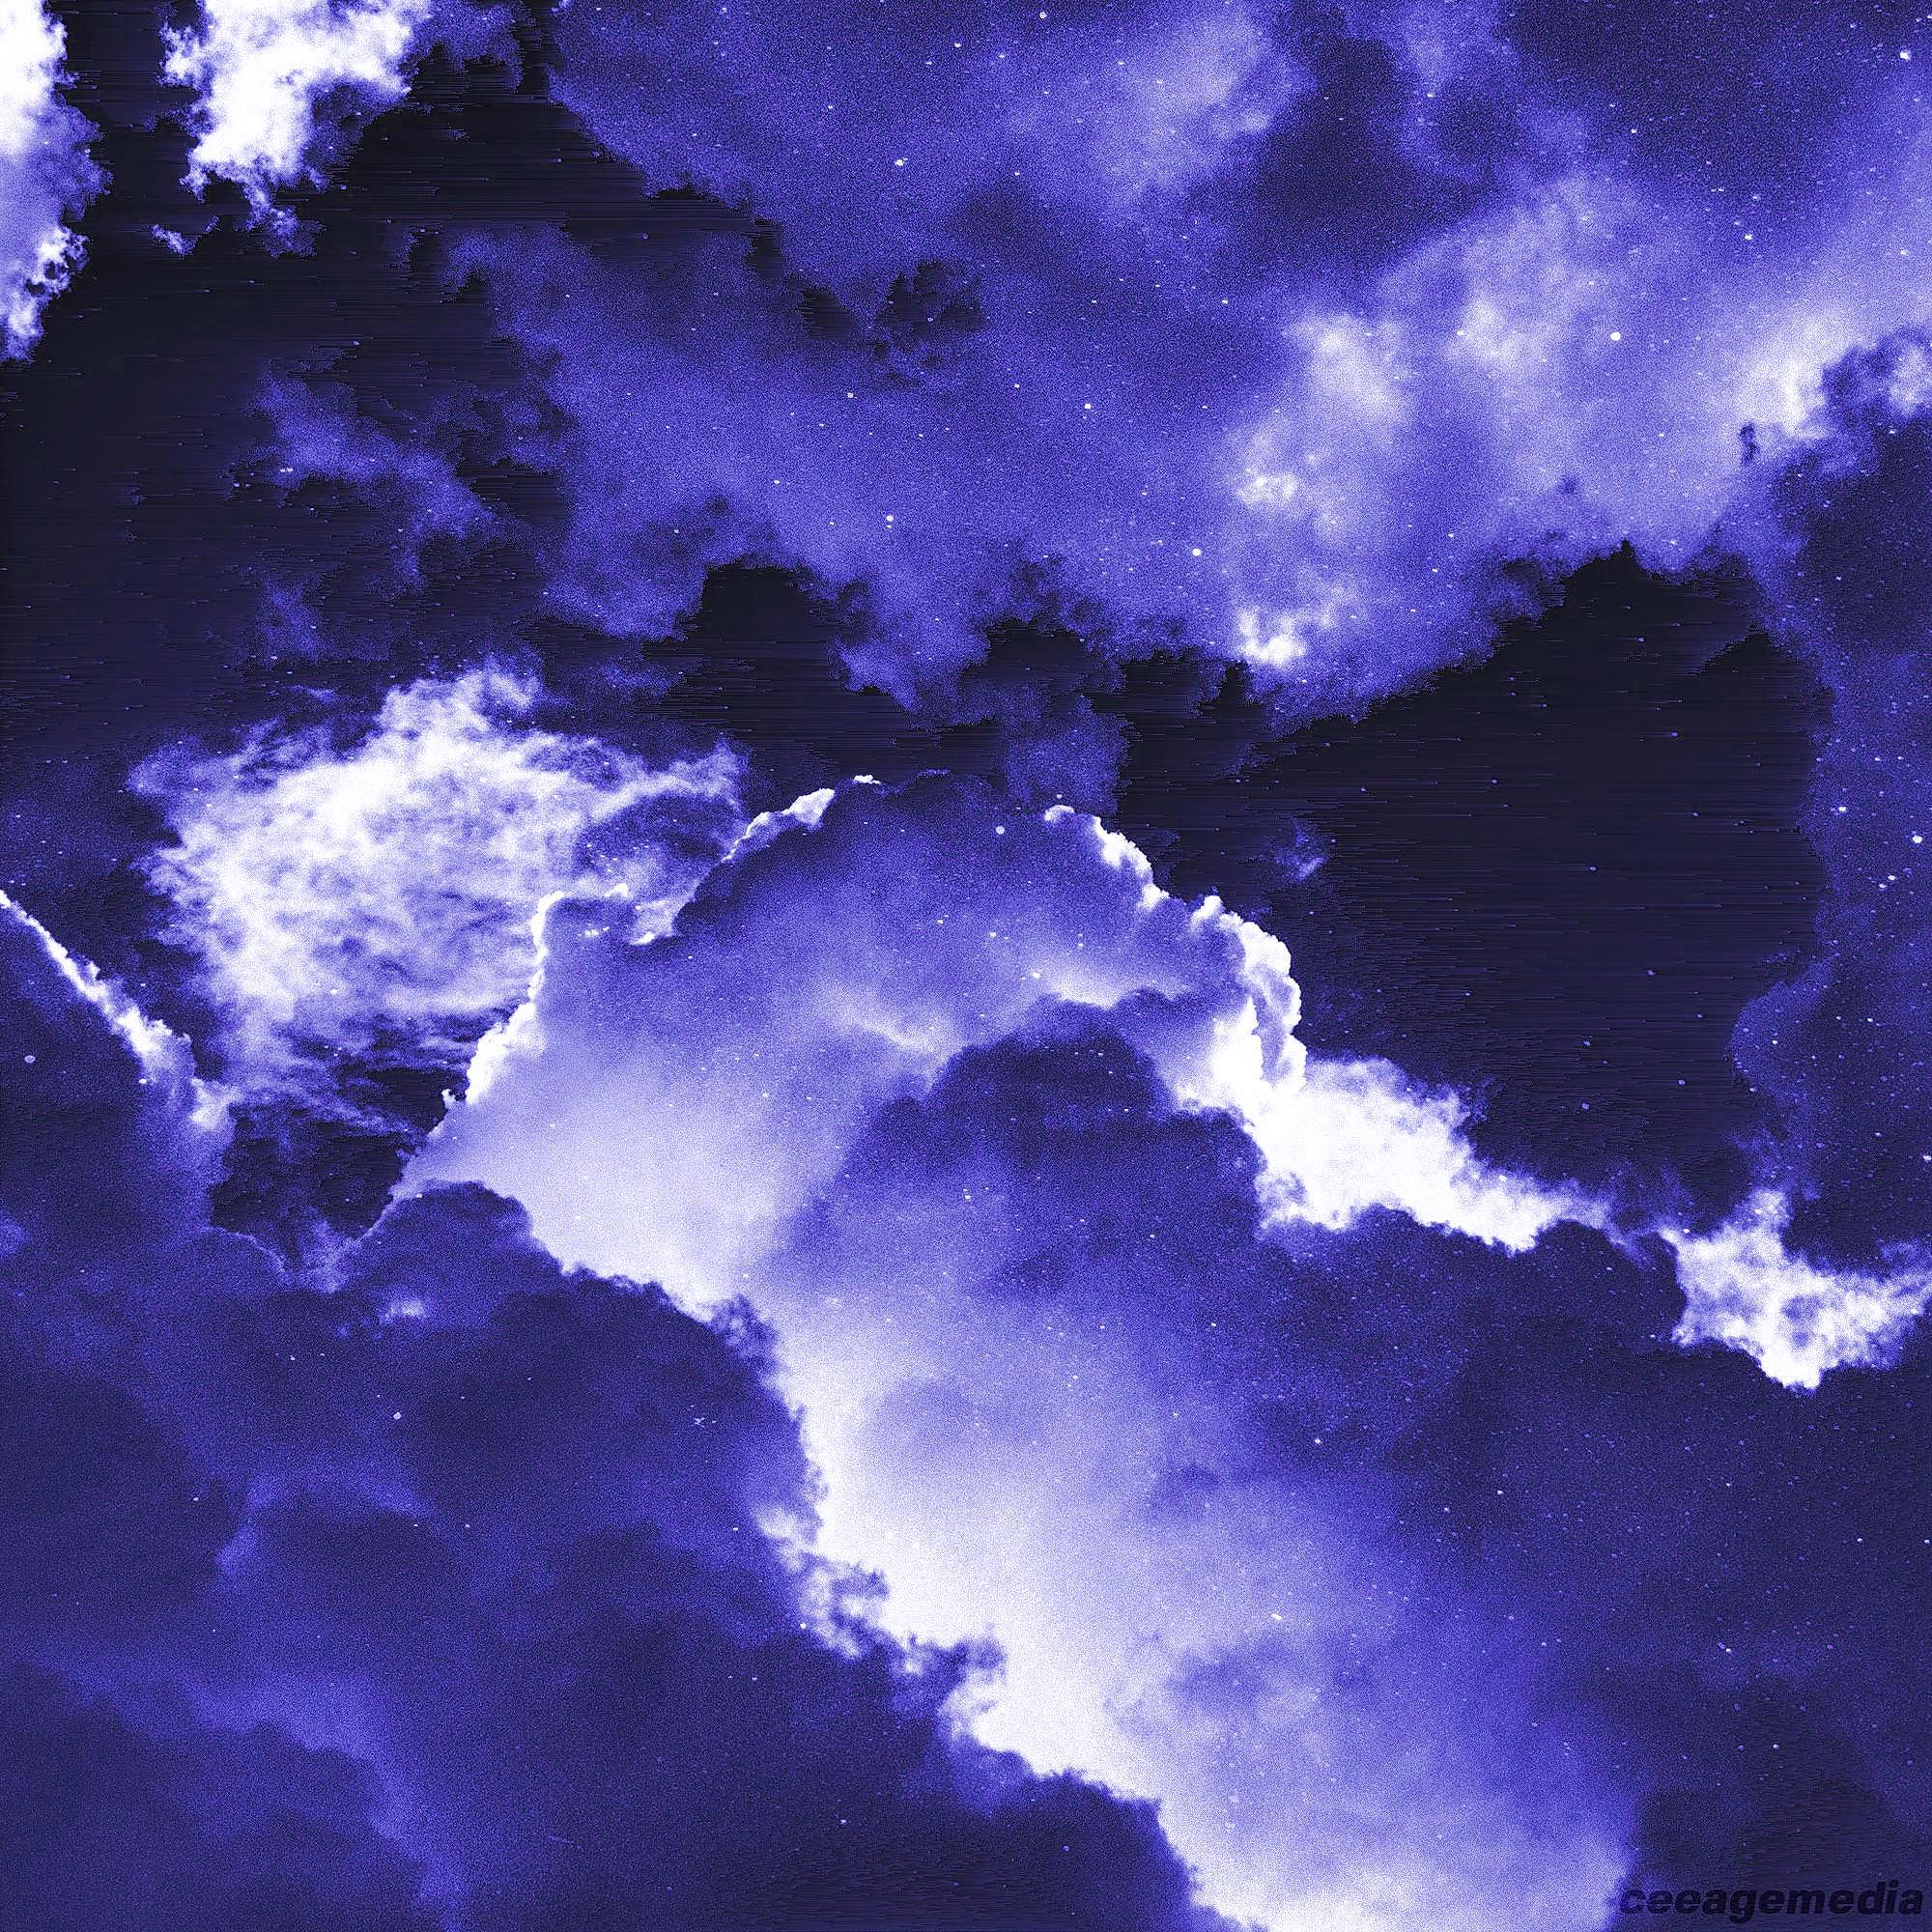 A watercolor painting of a deep blue sky with fluffy white clouds and stars. - Indigo